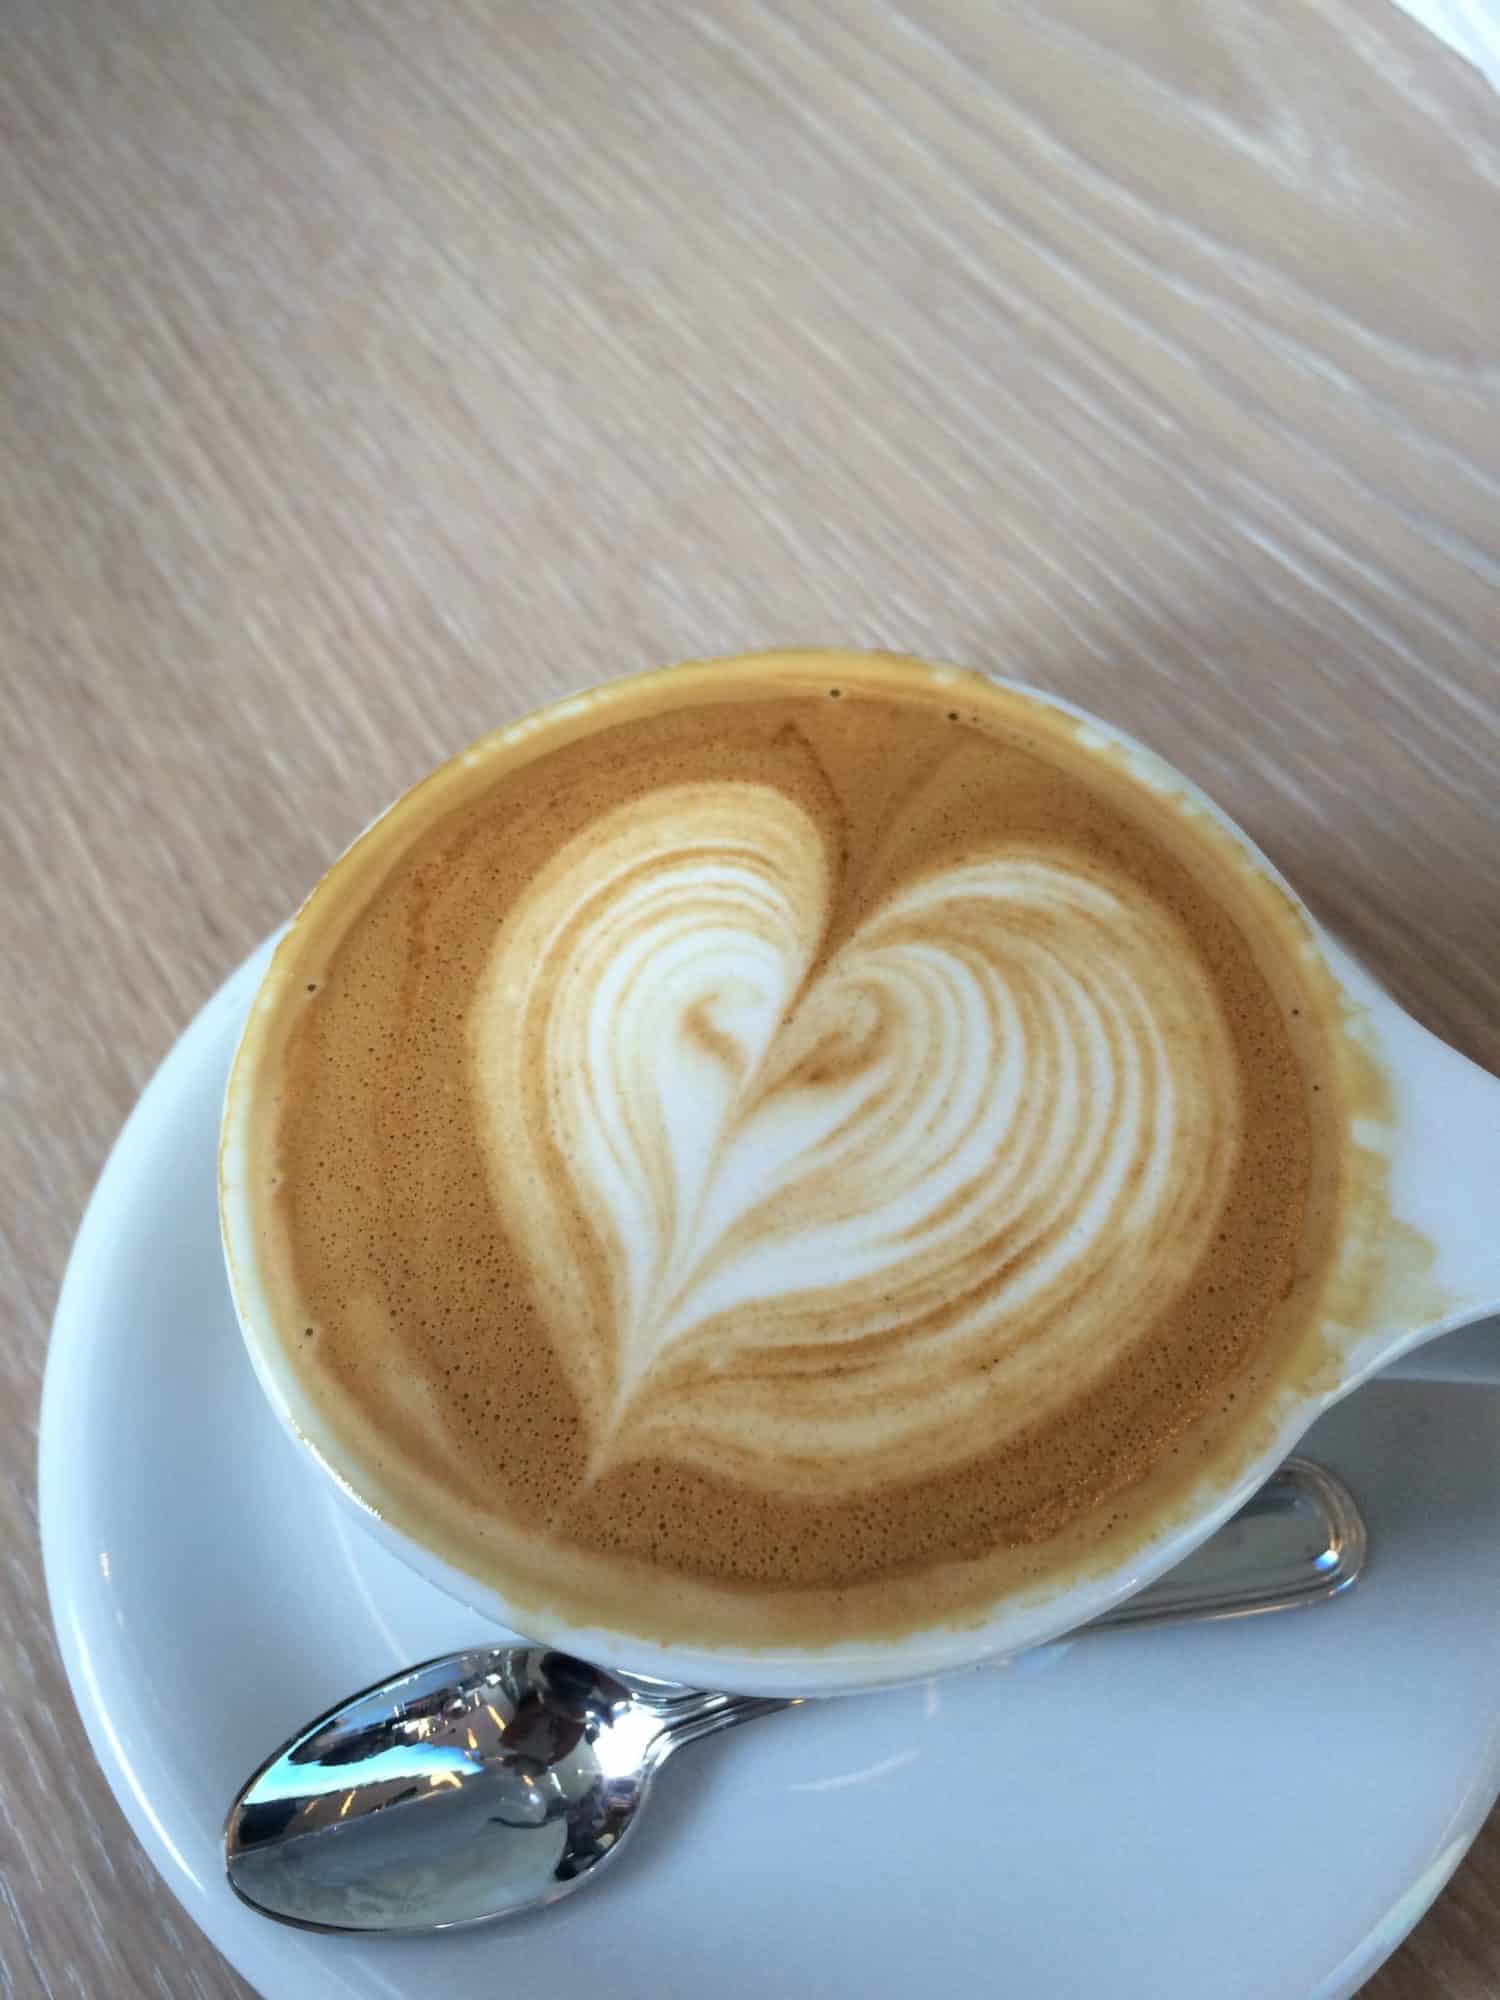 cup of coffee with latte art
